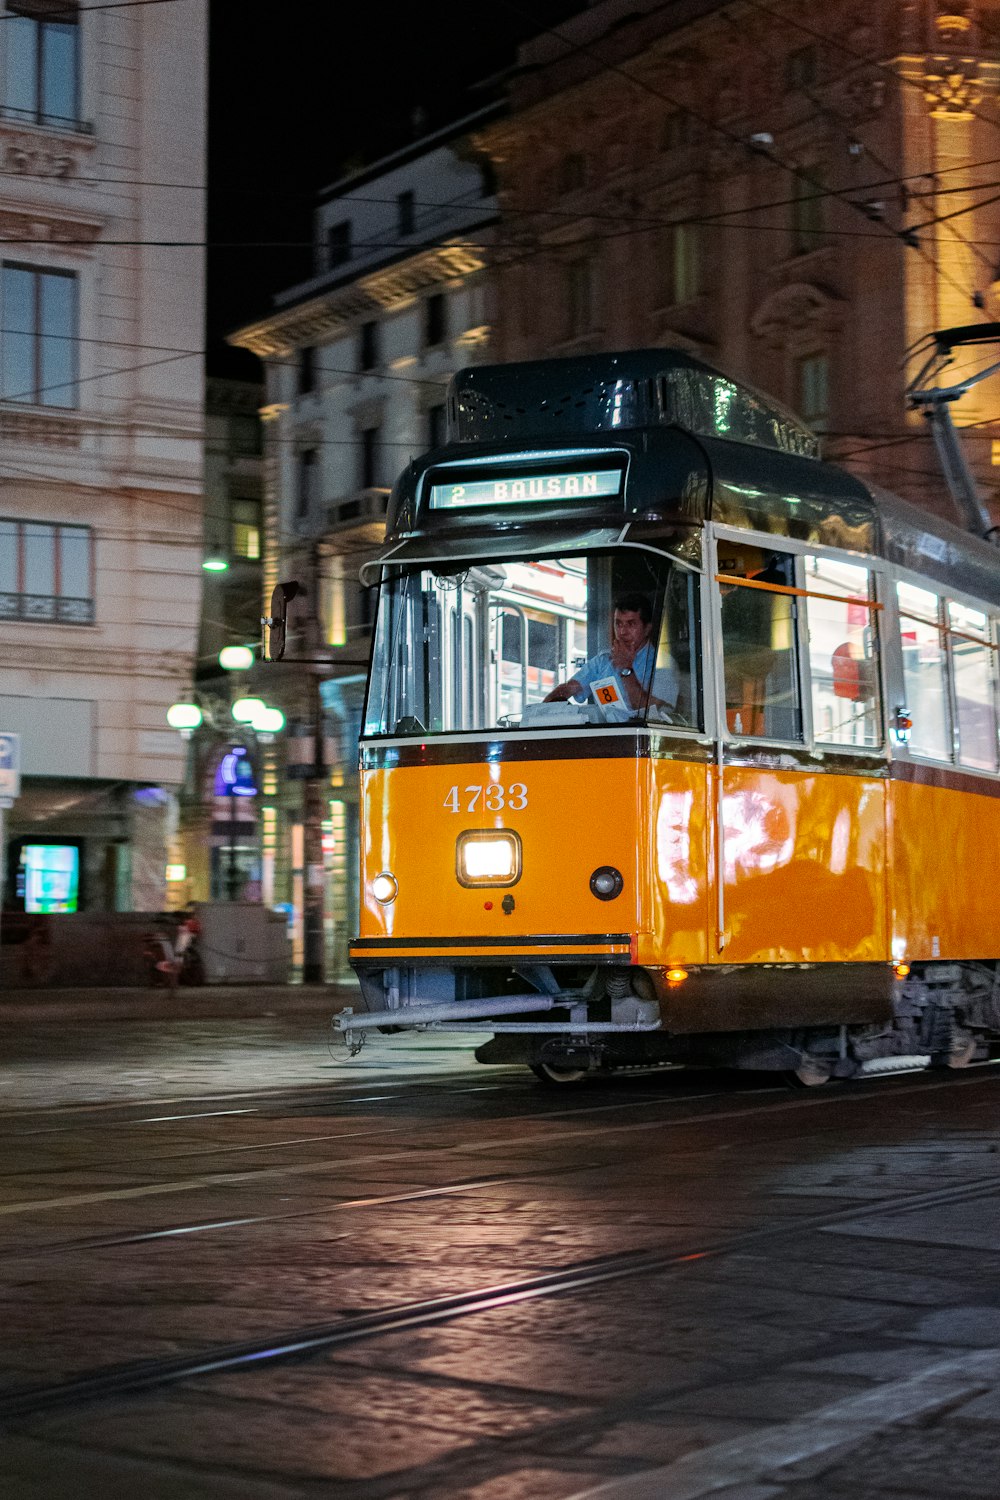 yellow and black tram on road during night time